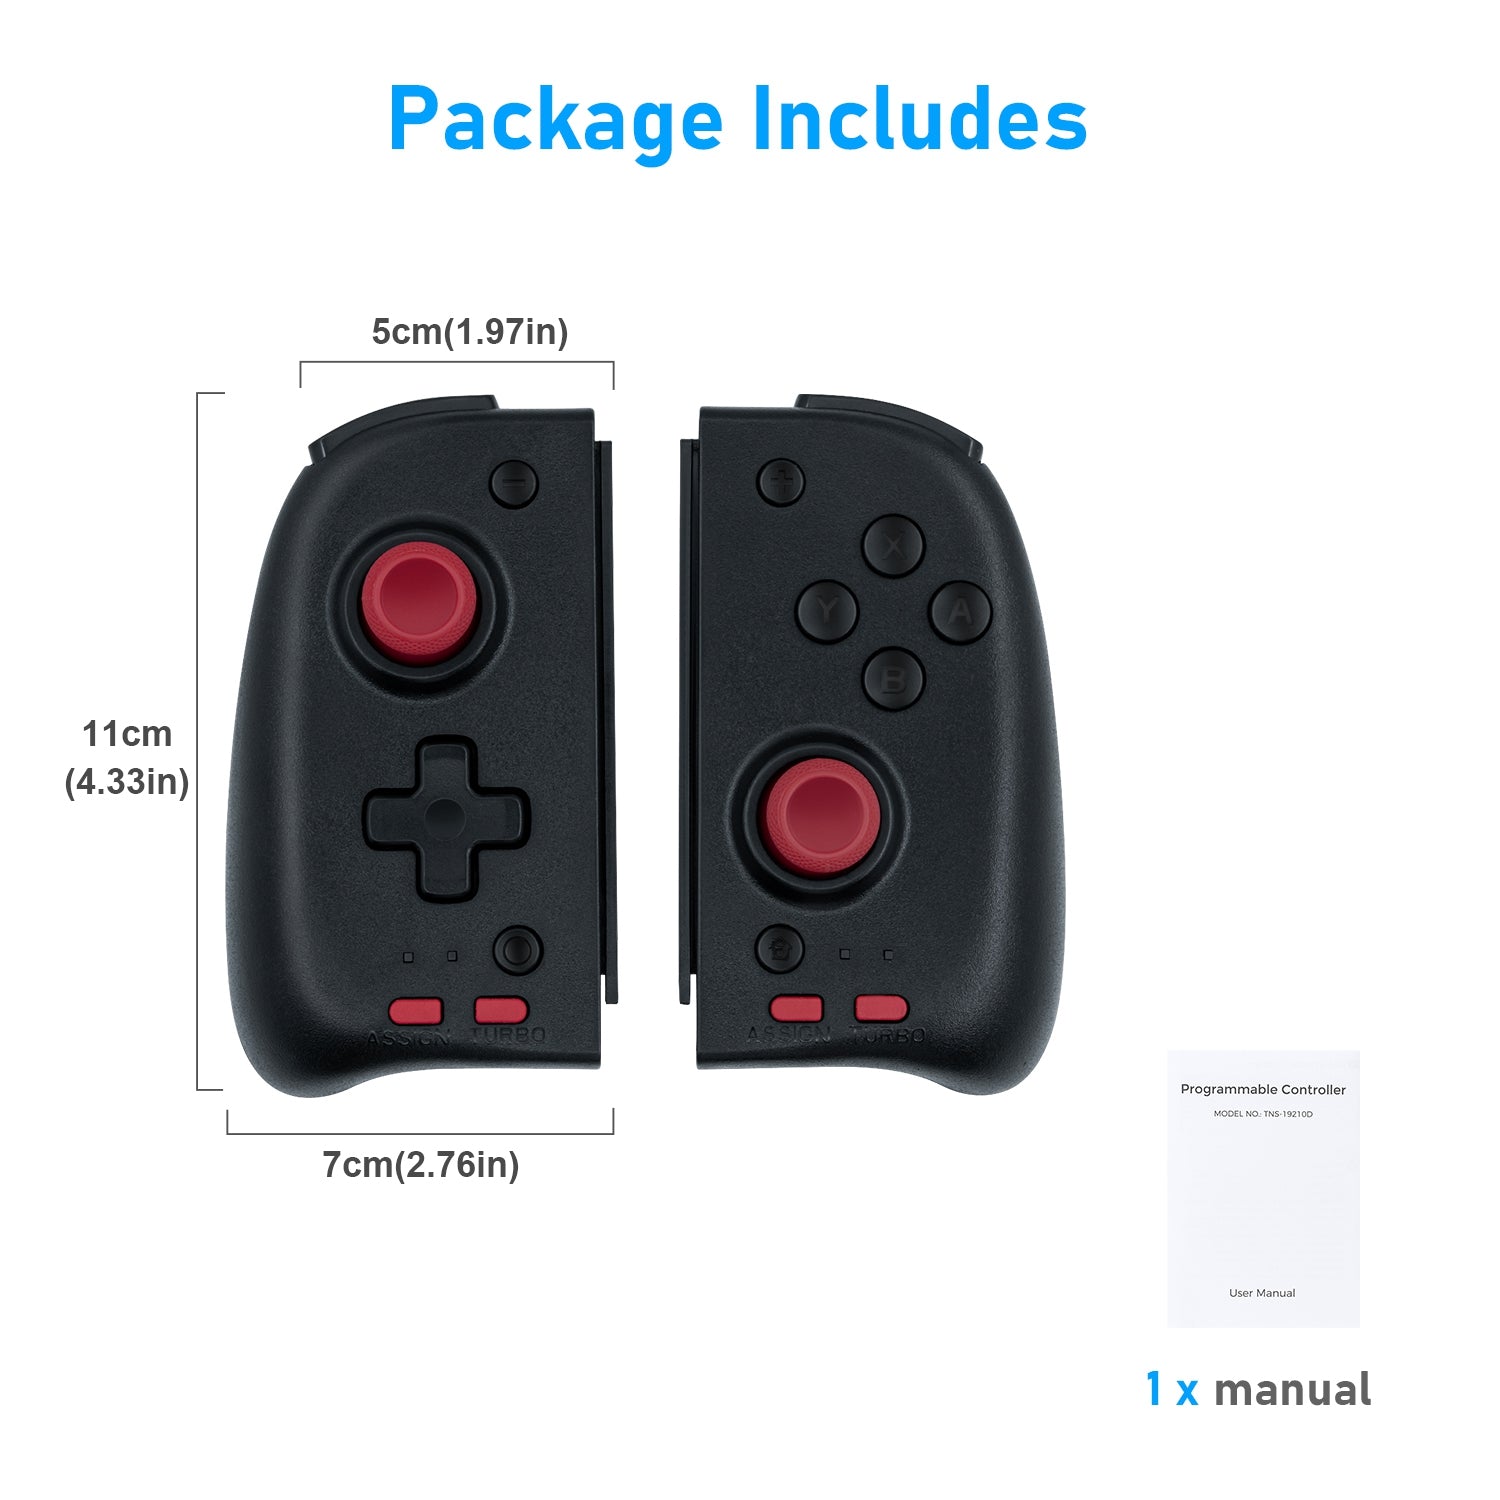 Switch Controller for Nintendo Switch Joycon, Programmable Controller for  Nintendo Switch/OLED Joycon with Turbo, Motion, Switch Controllers Remote